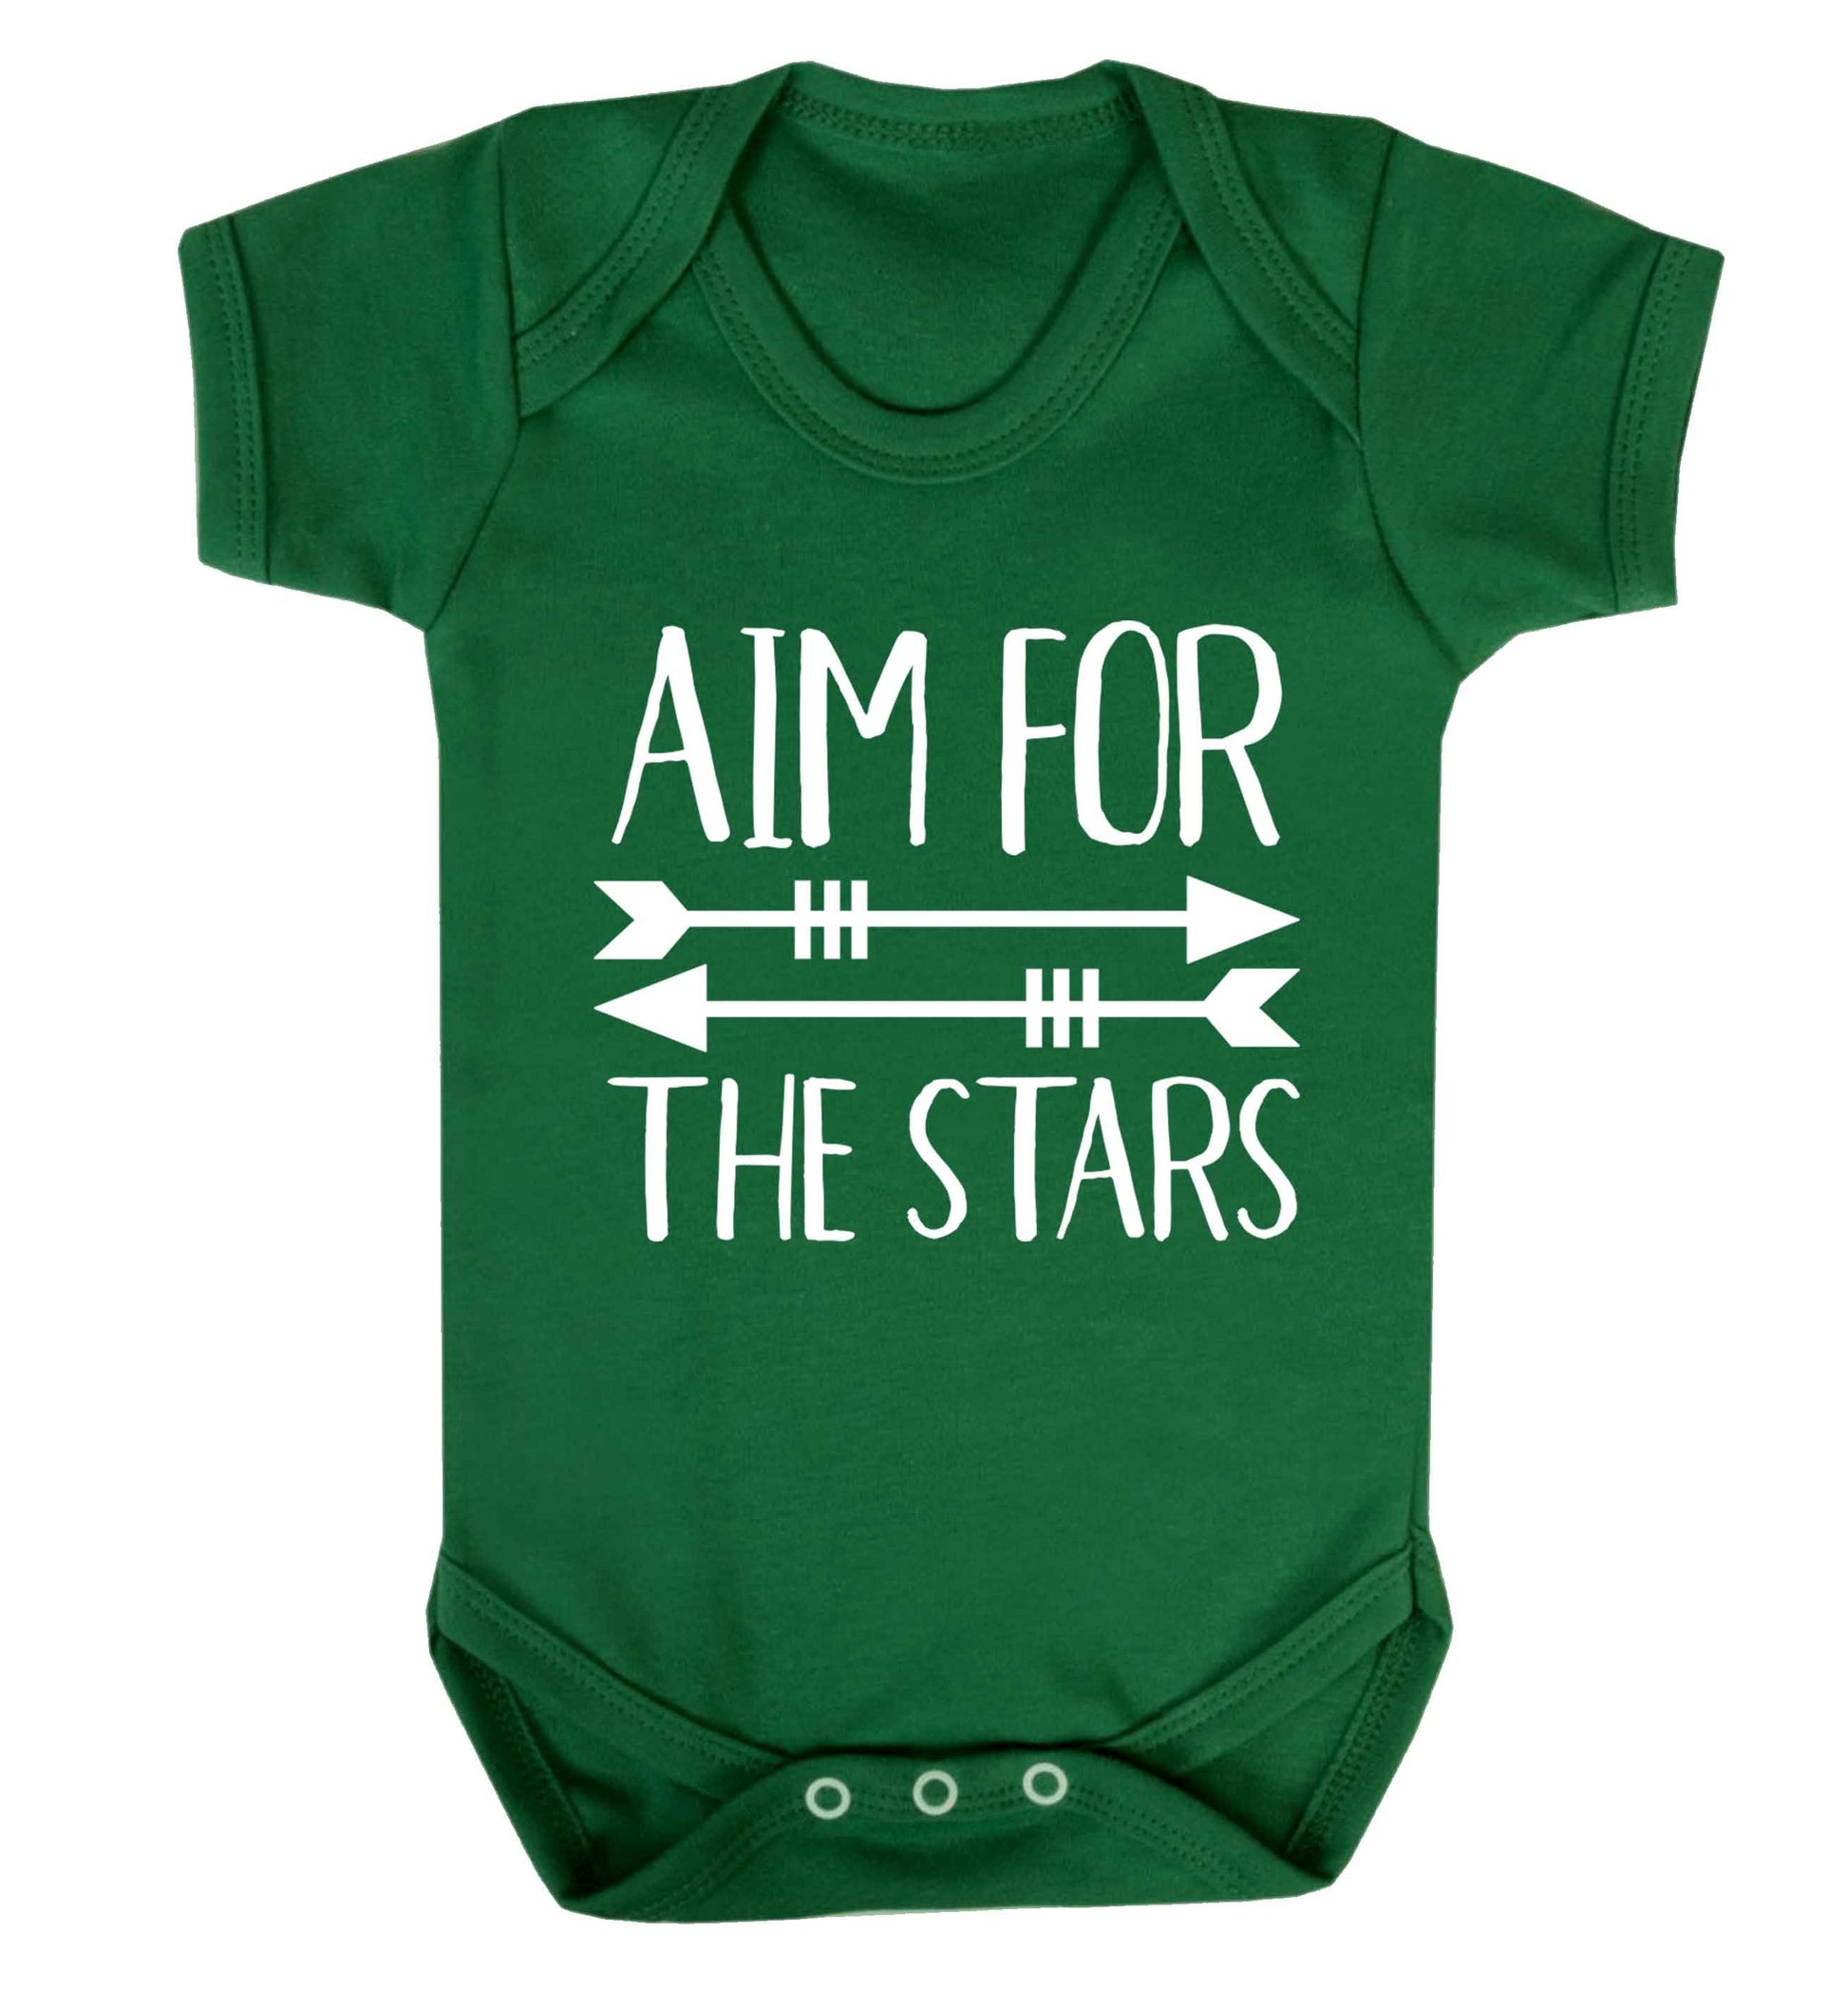 Aim for the stars Baby Vest green 18-24 months